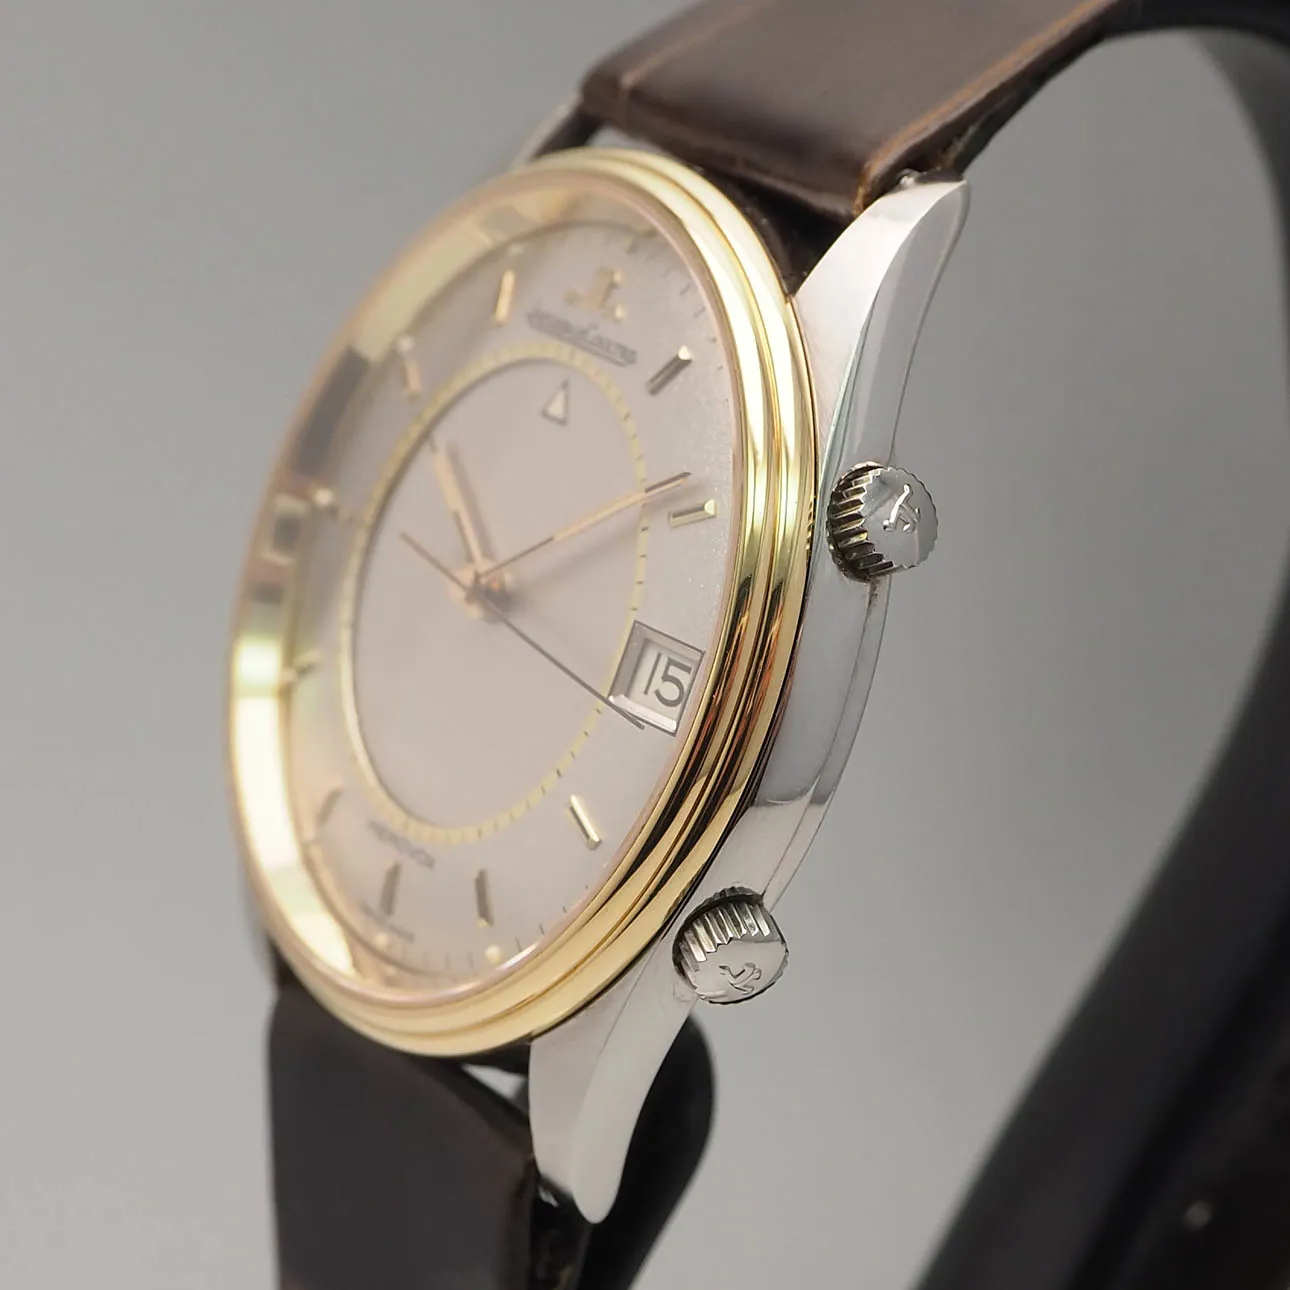 Jaeger-LeCoultre Memovox 141.012.5 36mm Yellow gold 3